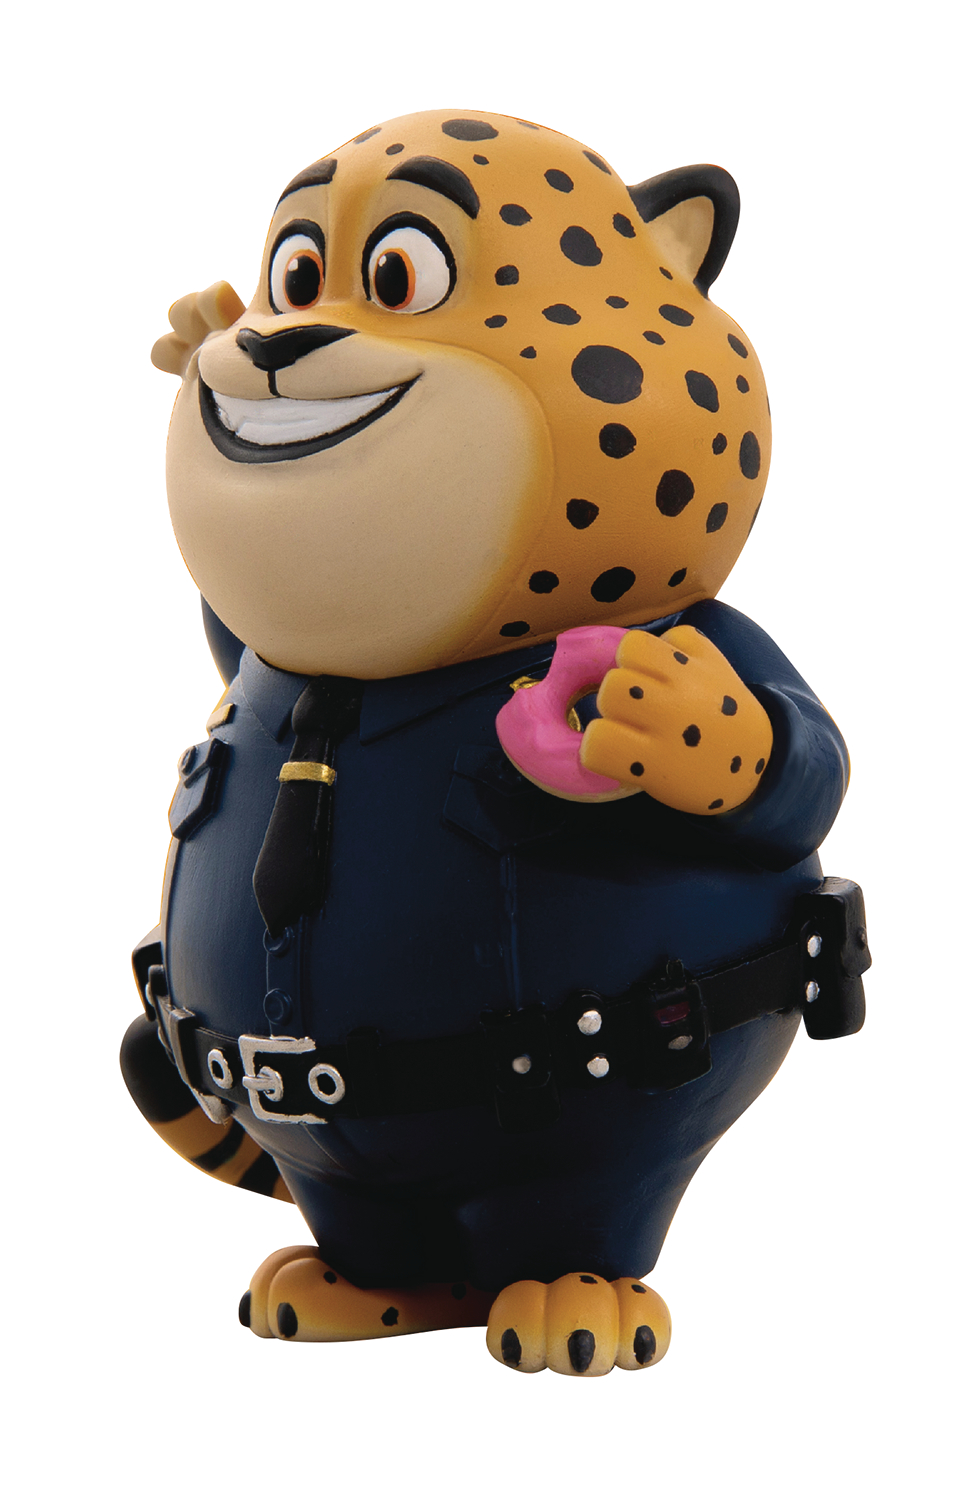 DISNEY ZOOTOPIA MEA-006 CLAWHAUSER PX FIG (OCT188174)